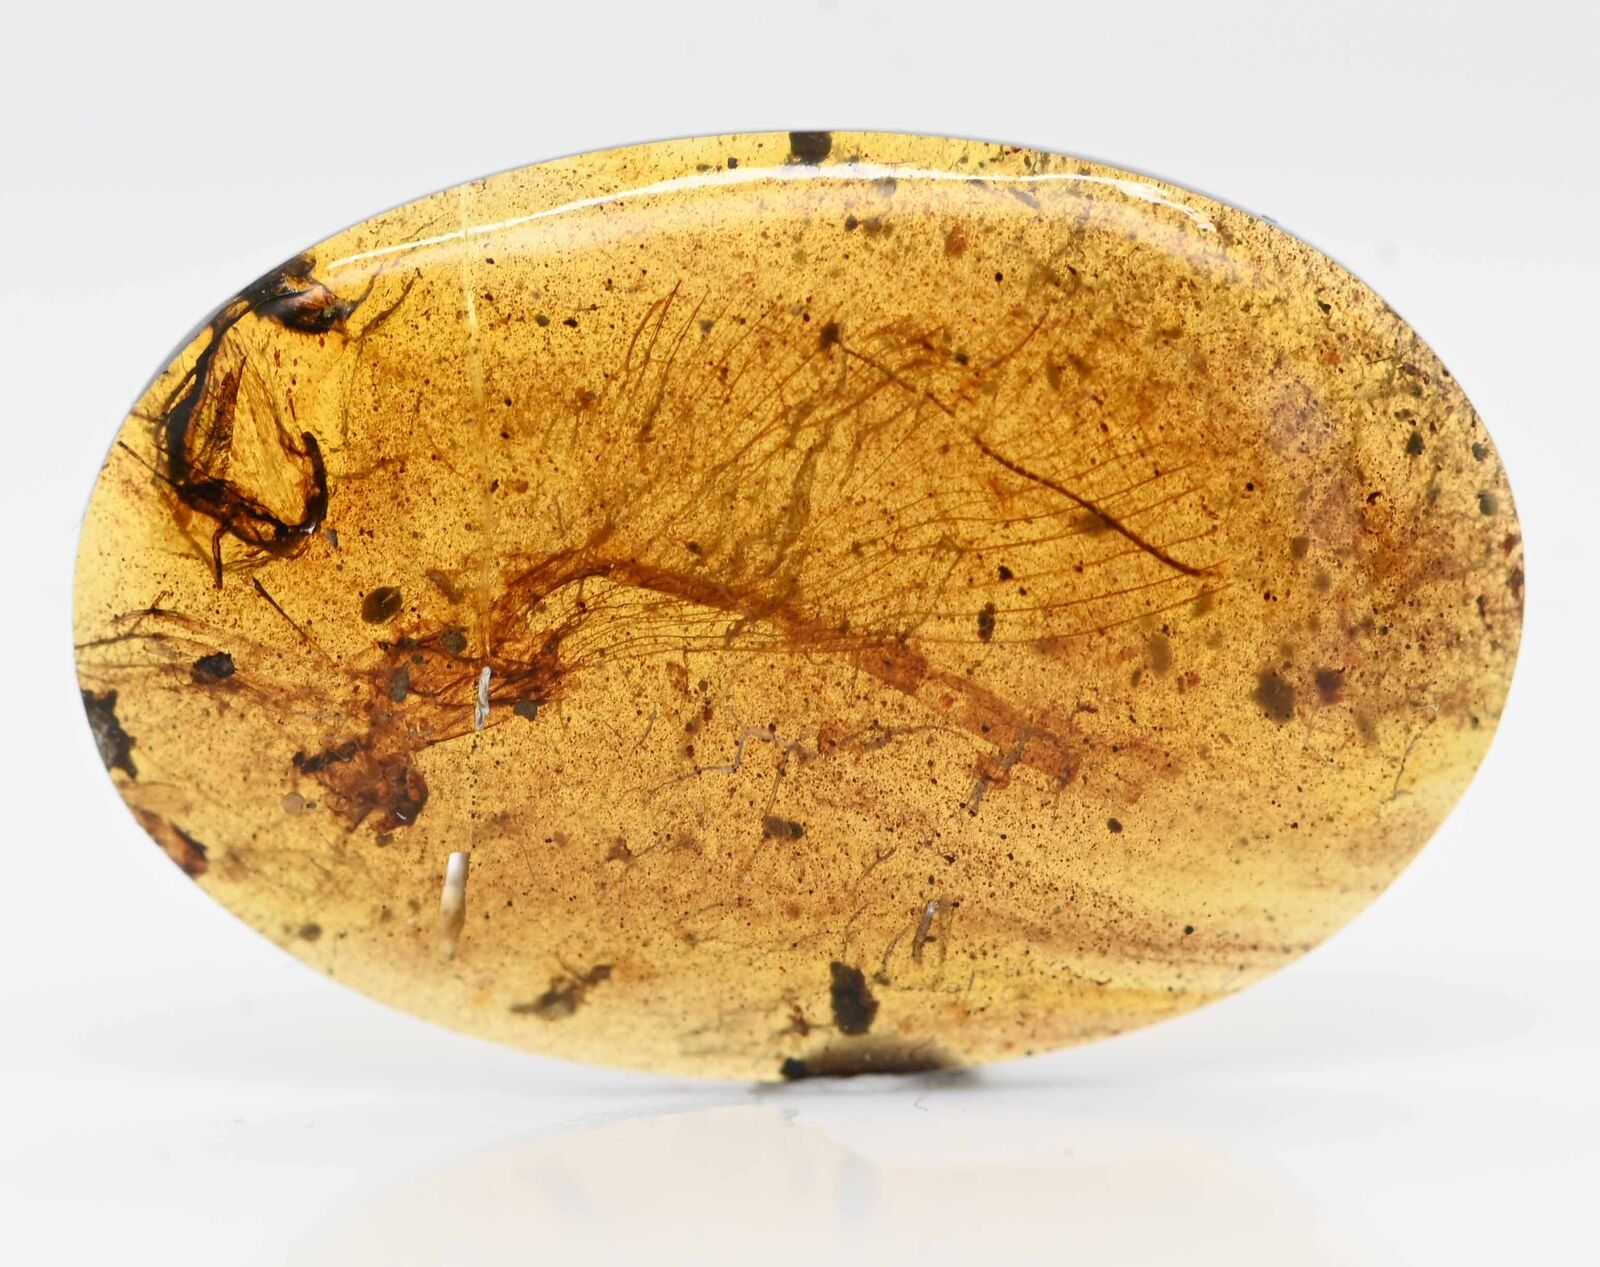 RARE Large Zygoptera (Damselfly), Fossil Inclusion in Burmese Amber